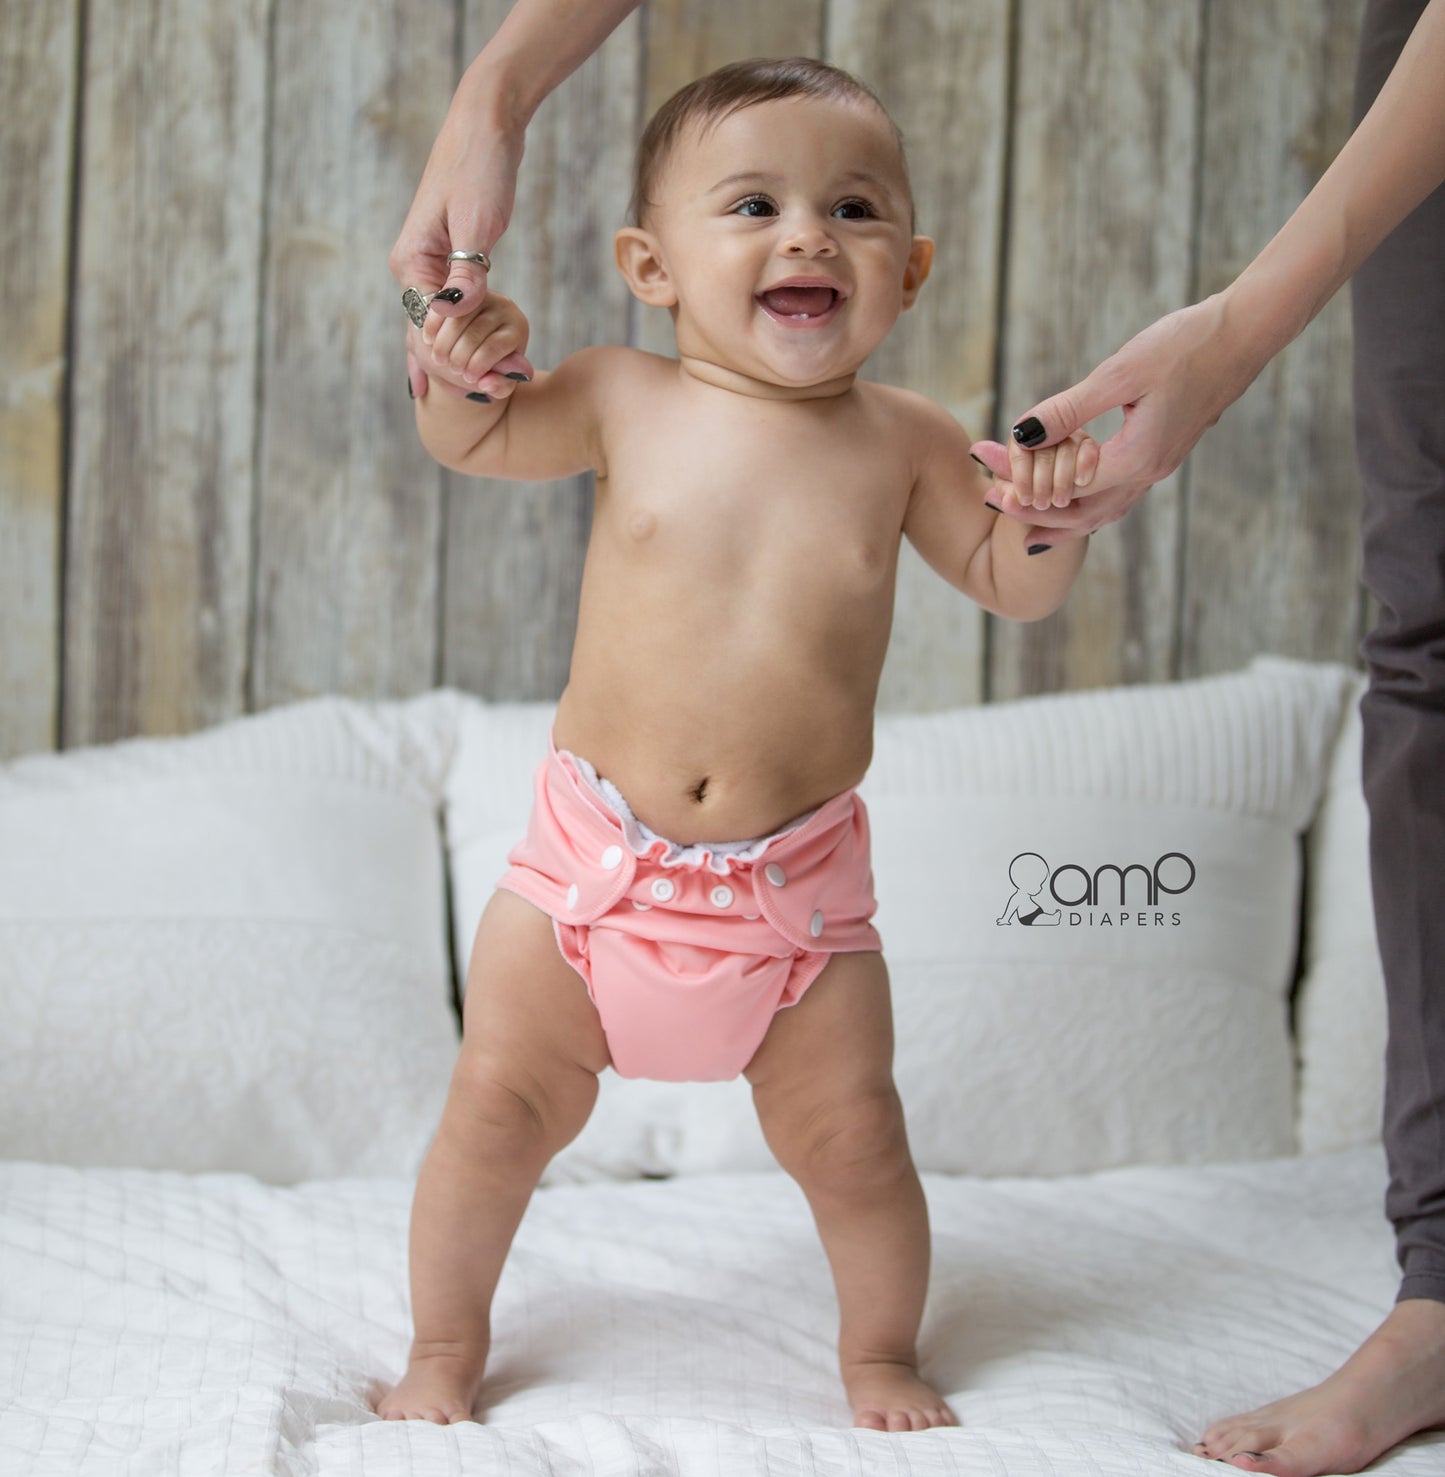 AMP One Size Duo Pocket Diaper (FINAL SALE)